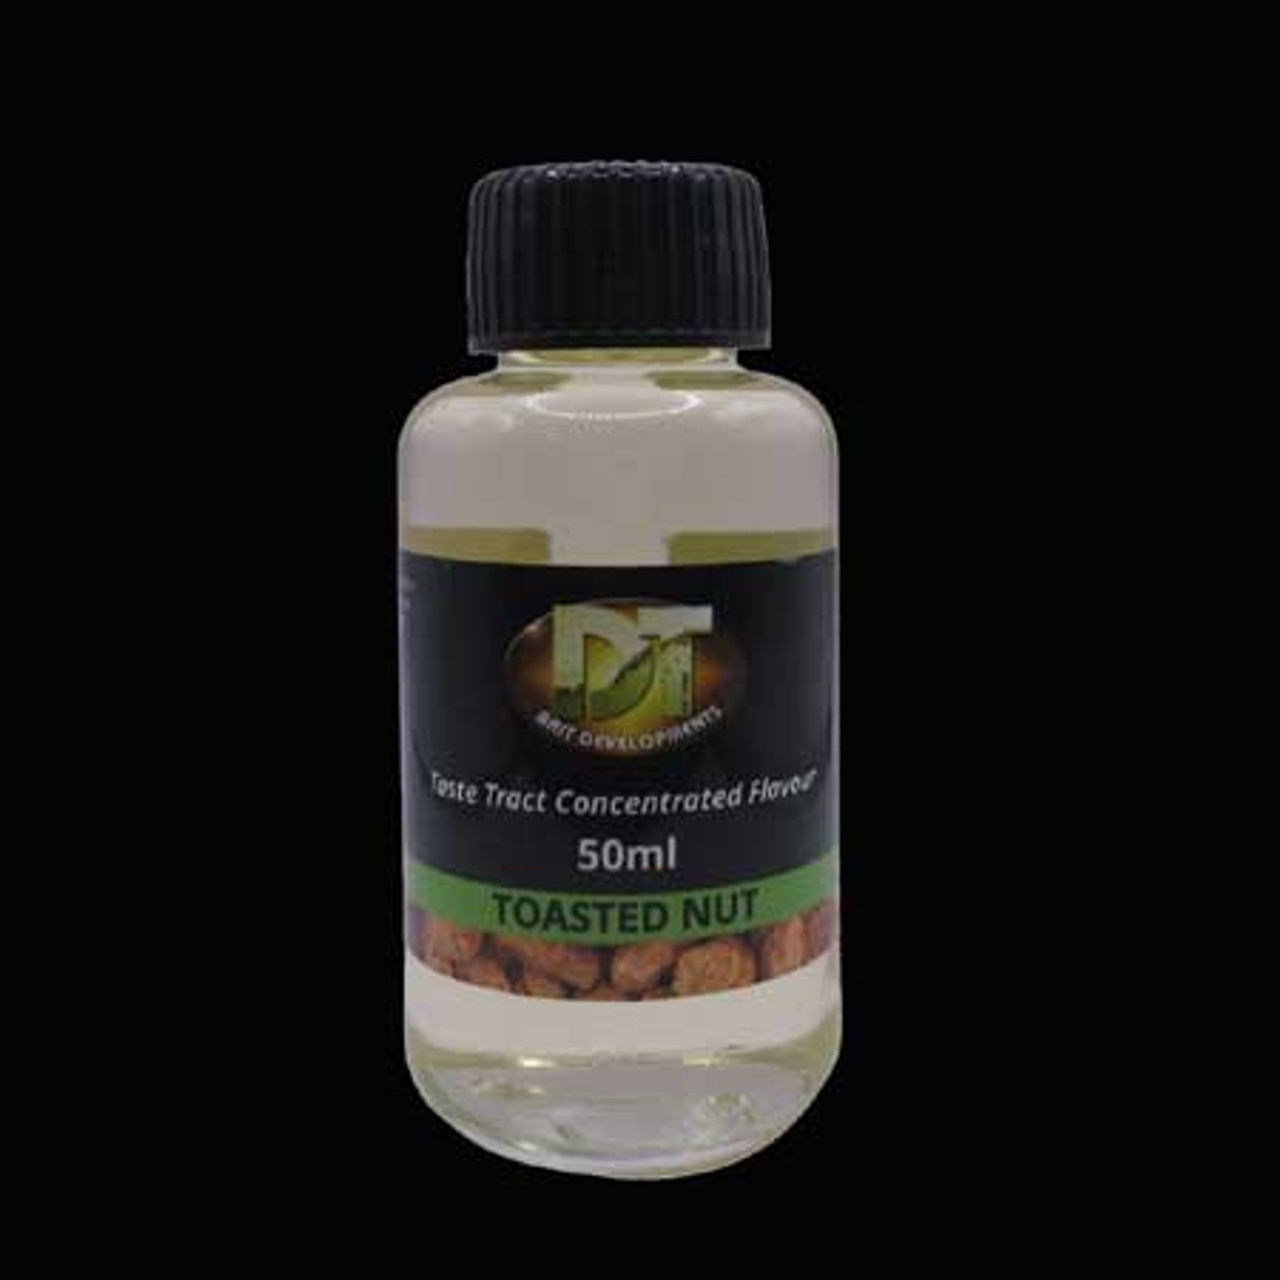 DT Baits Toasted Nut Concentrated Taste Tract Flavour 50ml